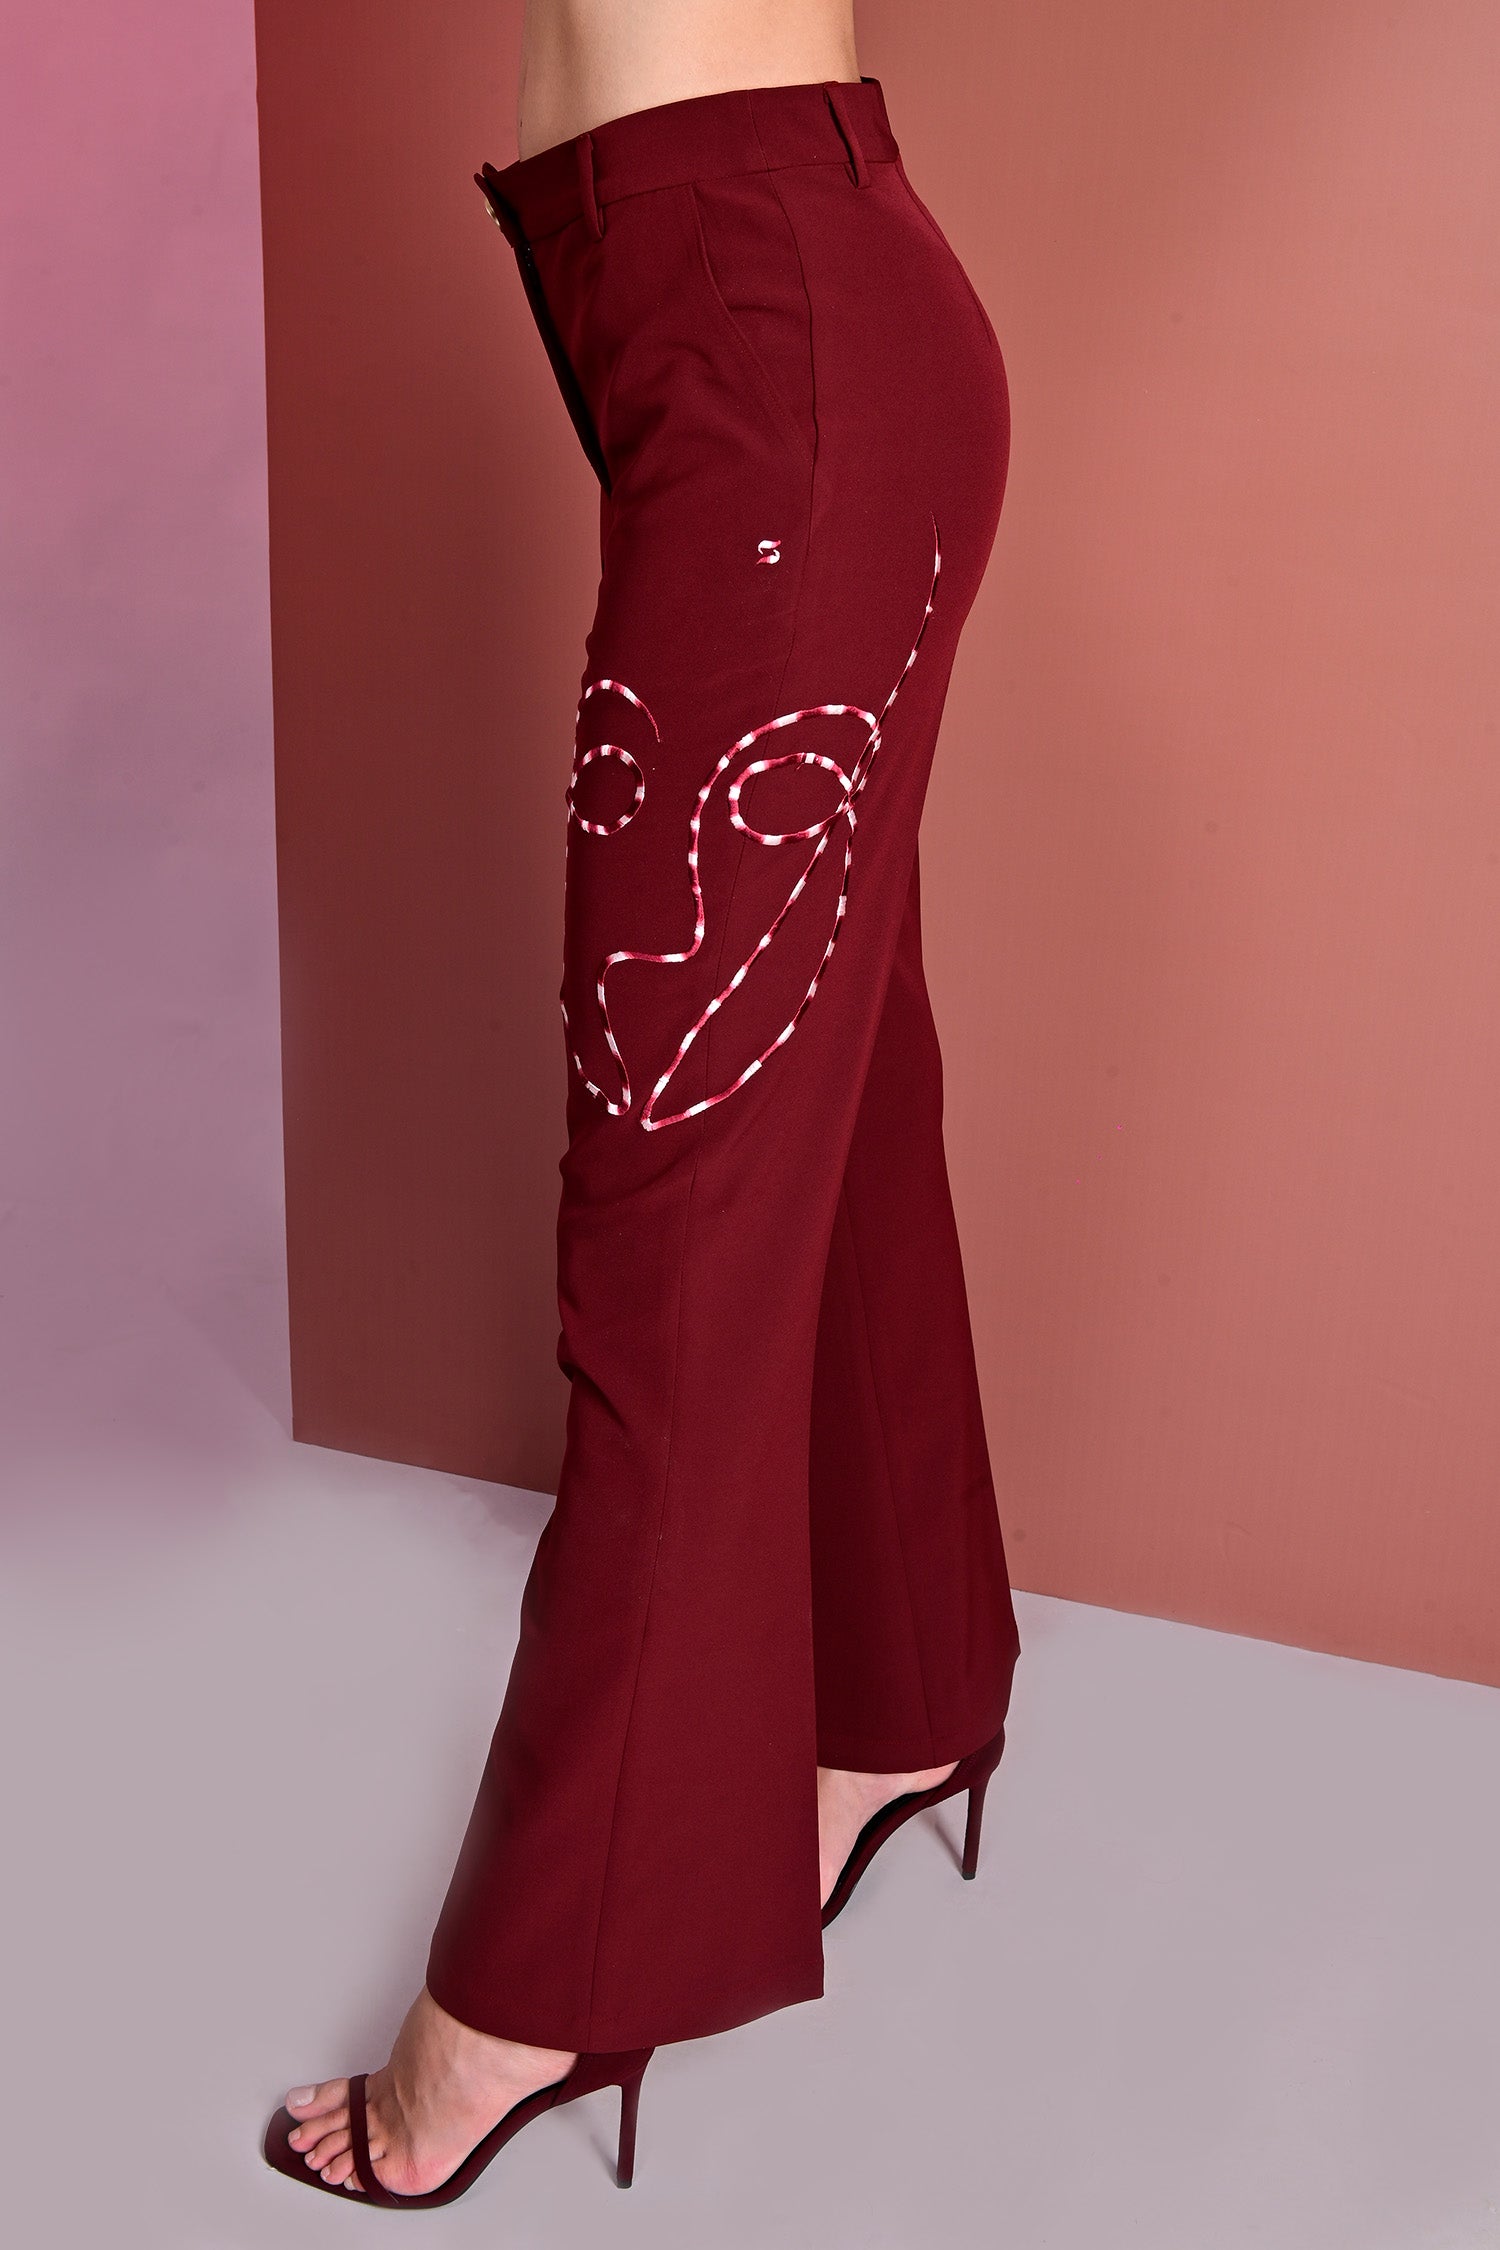 Sanguine Embroidered Flared High Waist Trousers